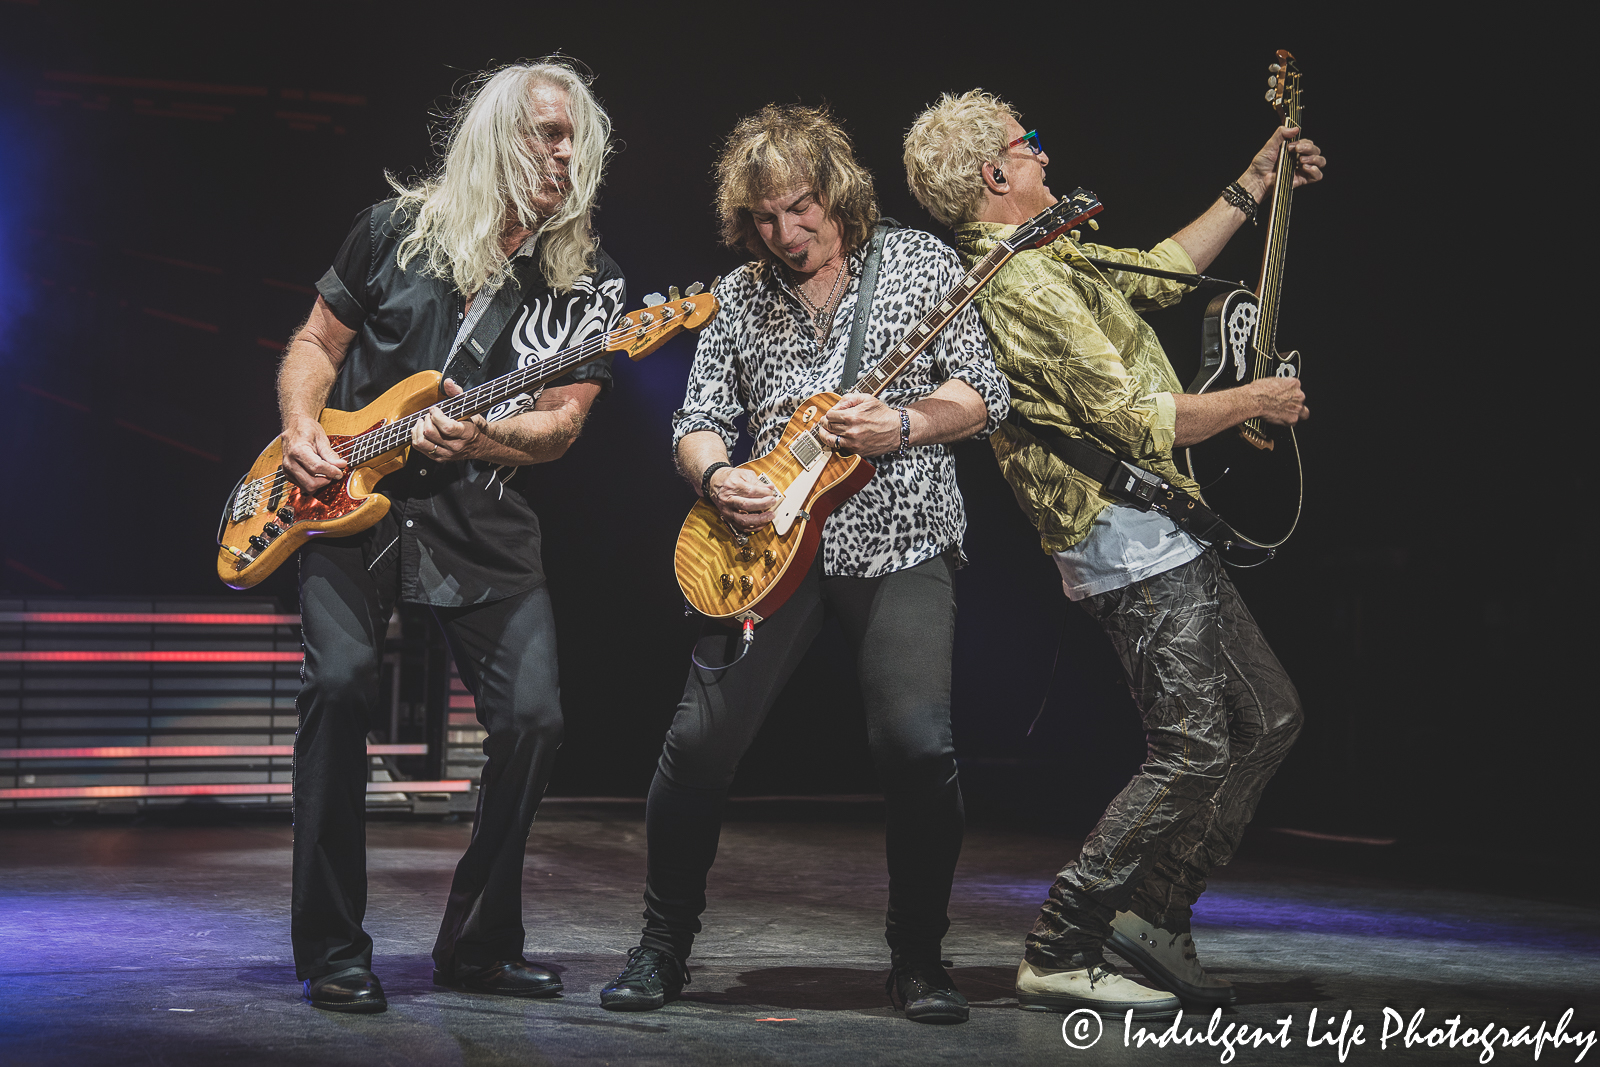 REO Speedwagon guitarists Bruce Hall, Dave Amato and Kevin Cronin playing live together at Starlight Theatre in Kansas City, MO on Ju e 14, 2022.